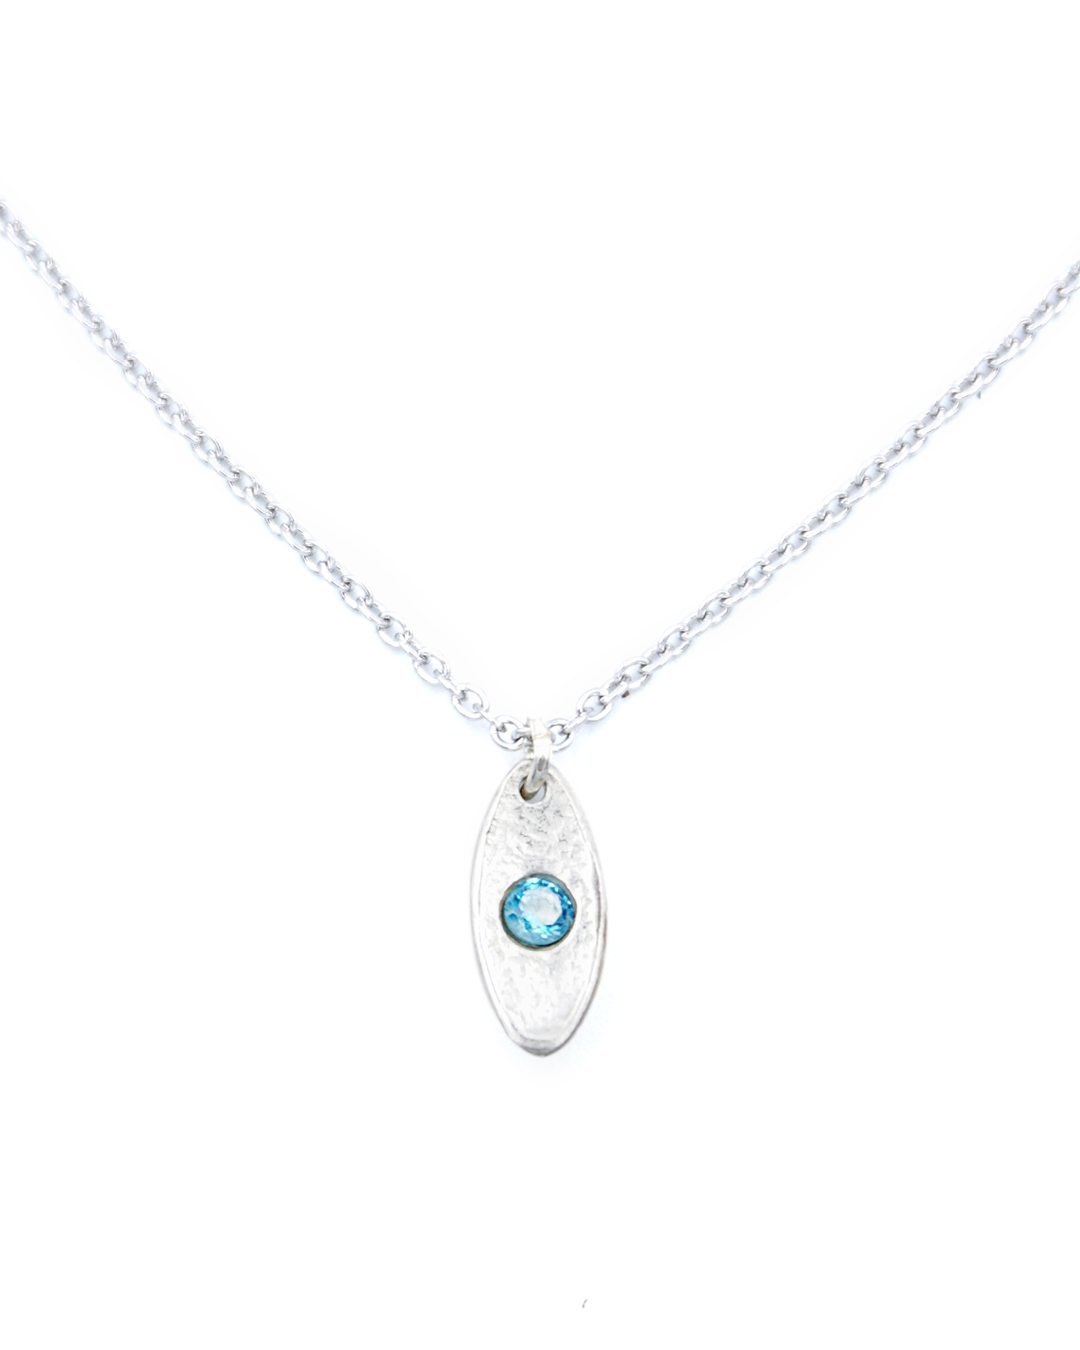 Eunomia Necklace - Silver - Catalog - Front View